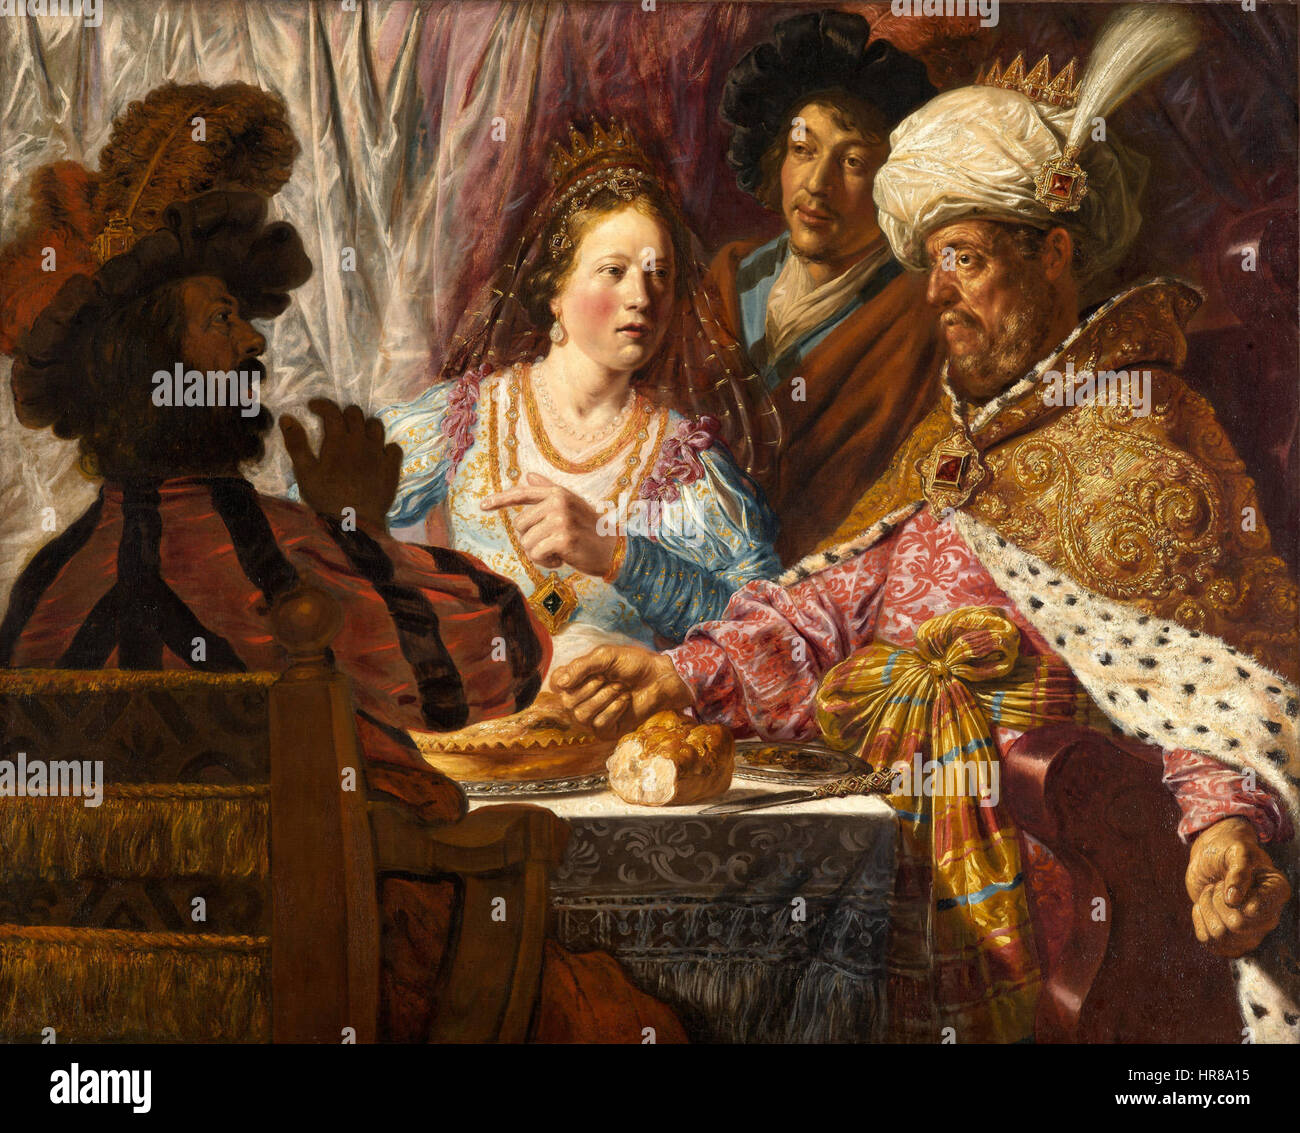 The Feast of Esther - Jan Lievens - Google Cultural Institute Stock Photo